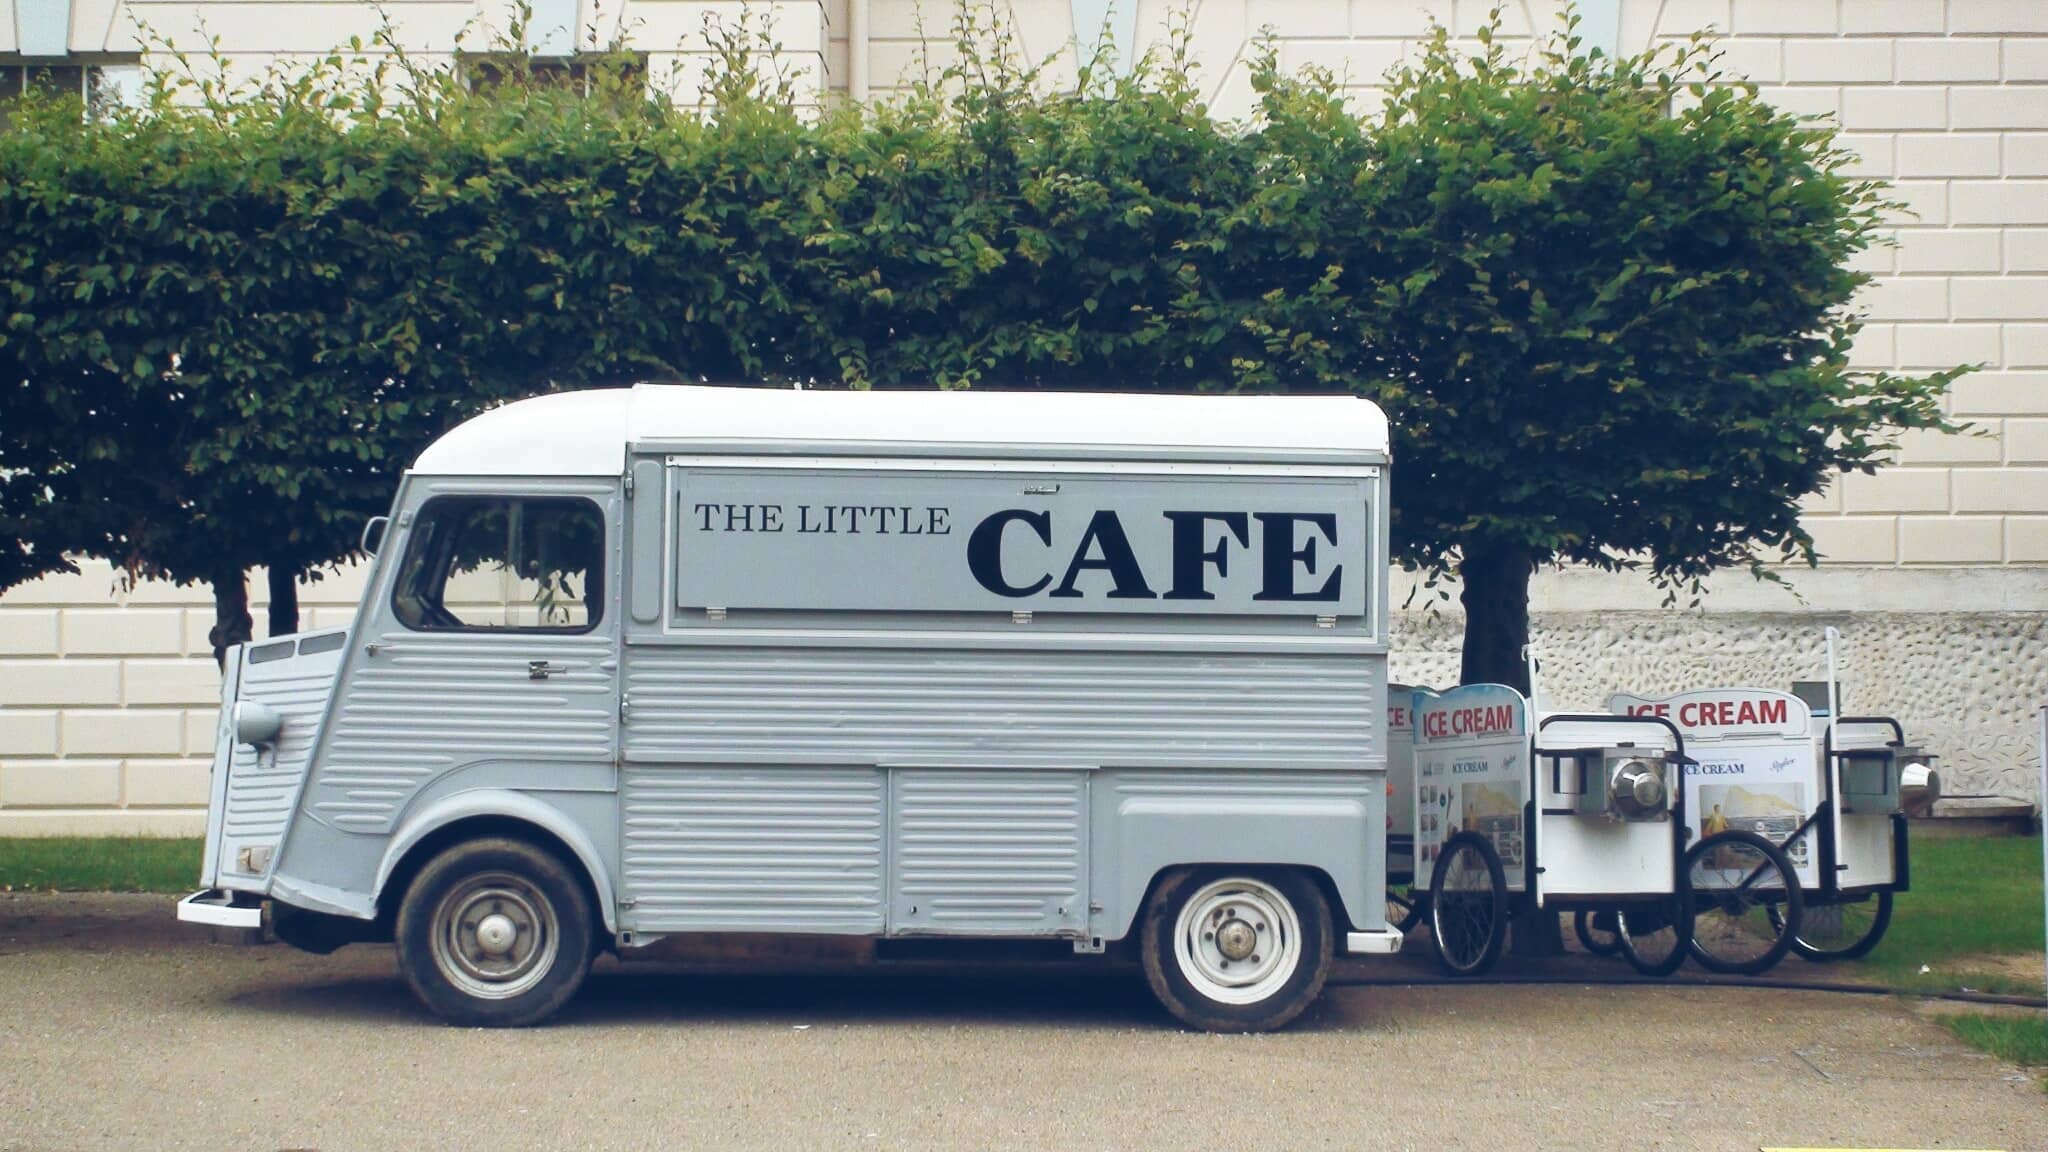 Coffee Truck used to describe our commercial vehicle insurance policy